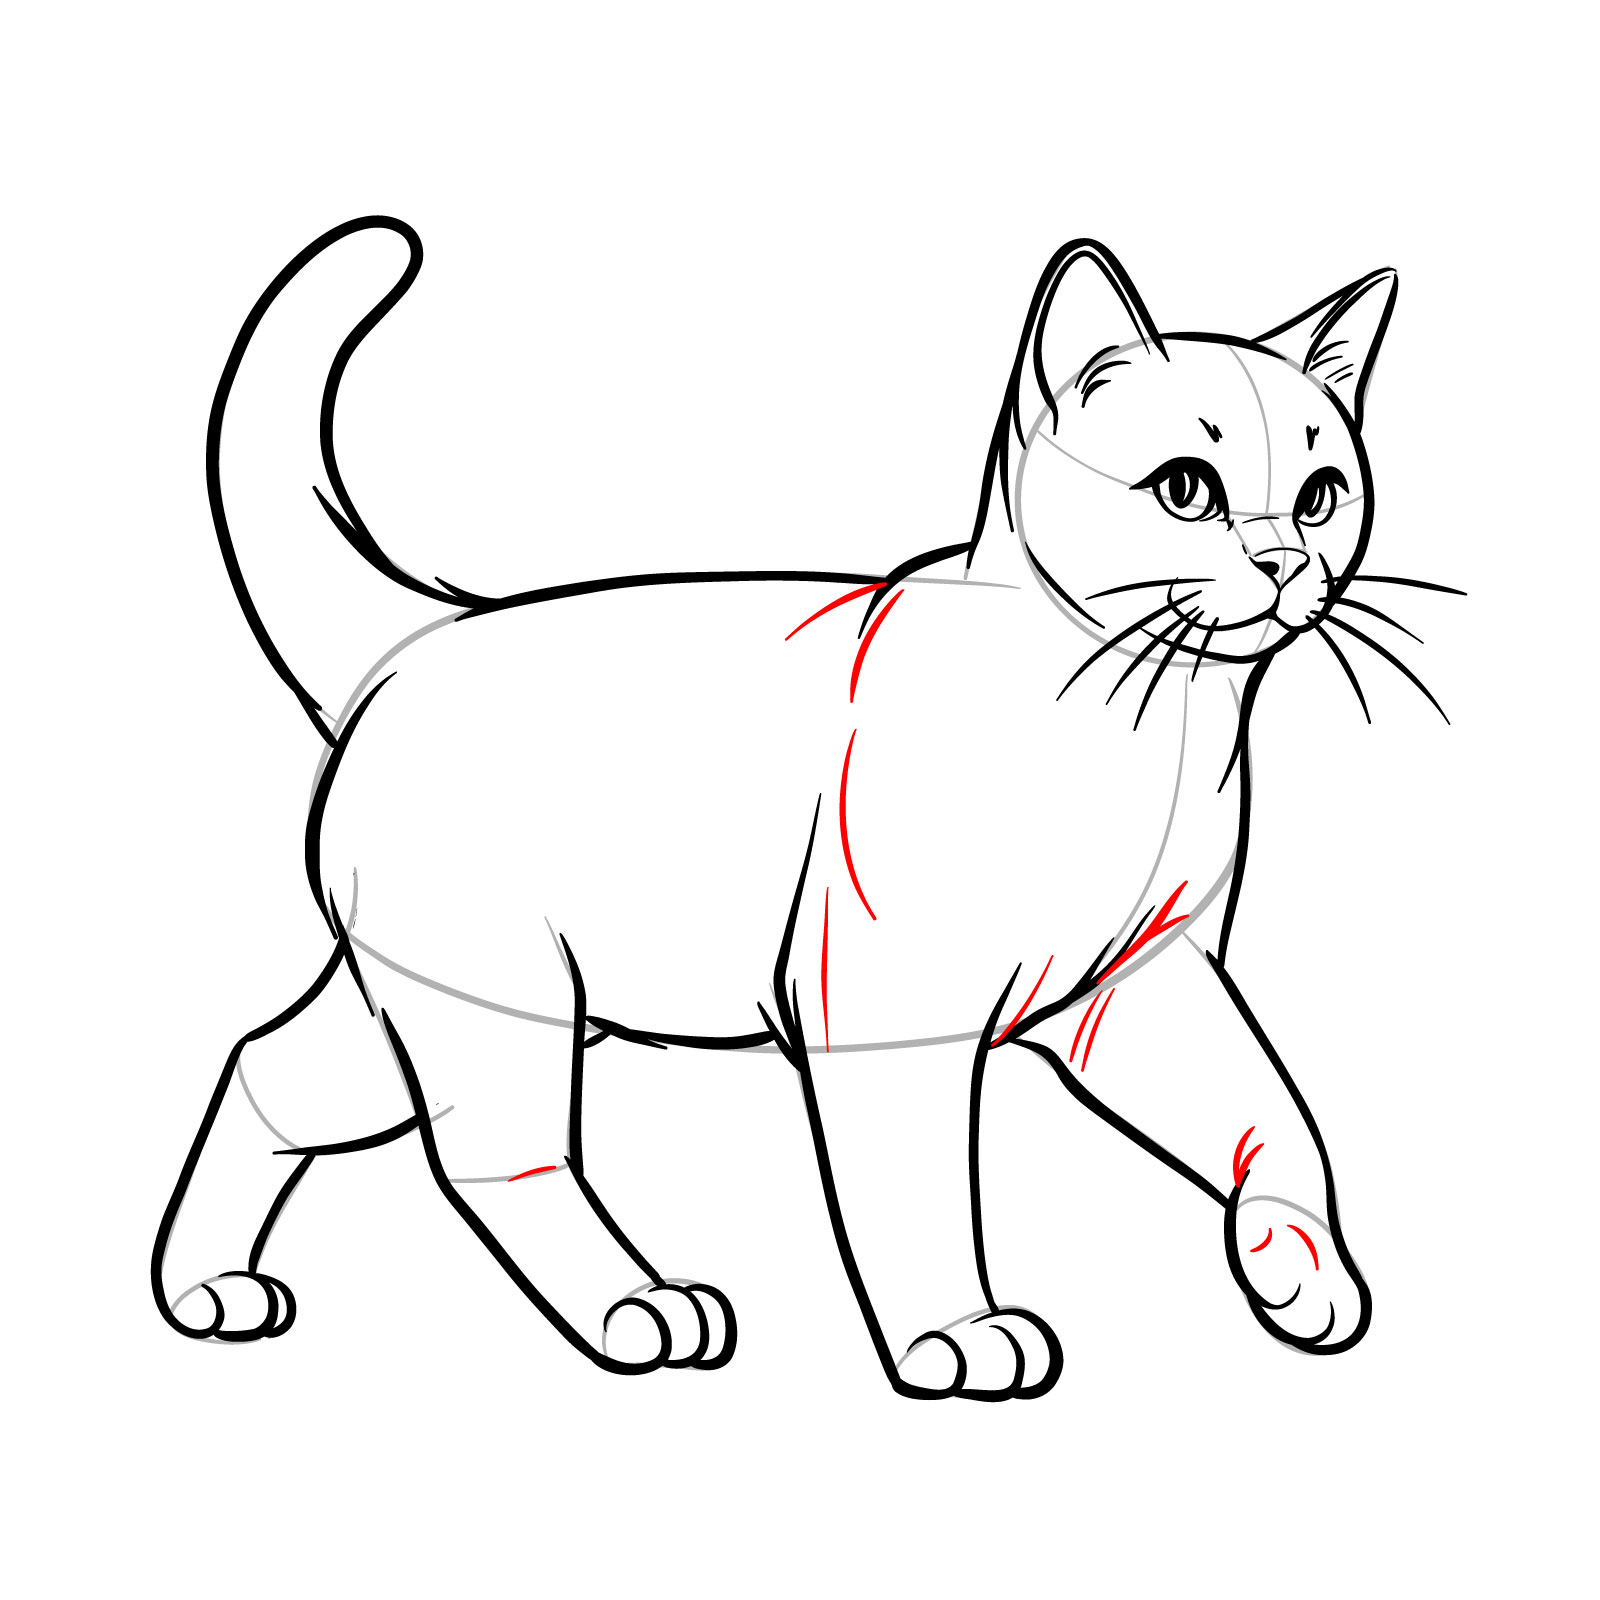 Adding subtle folds and texture to the cat's front body for a walking illustration - step 14